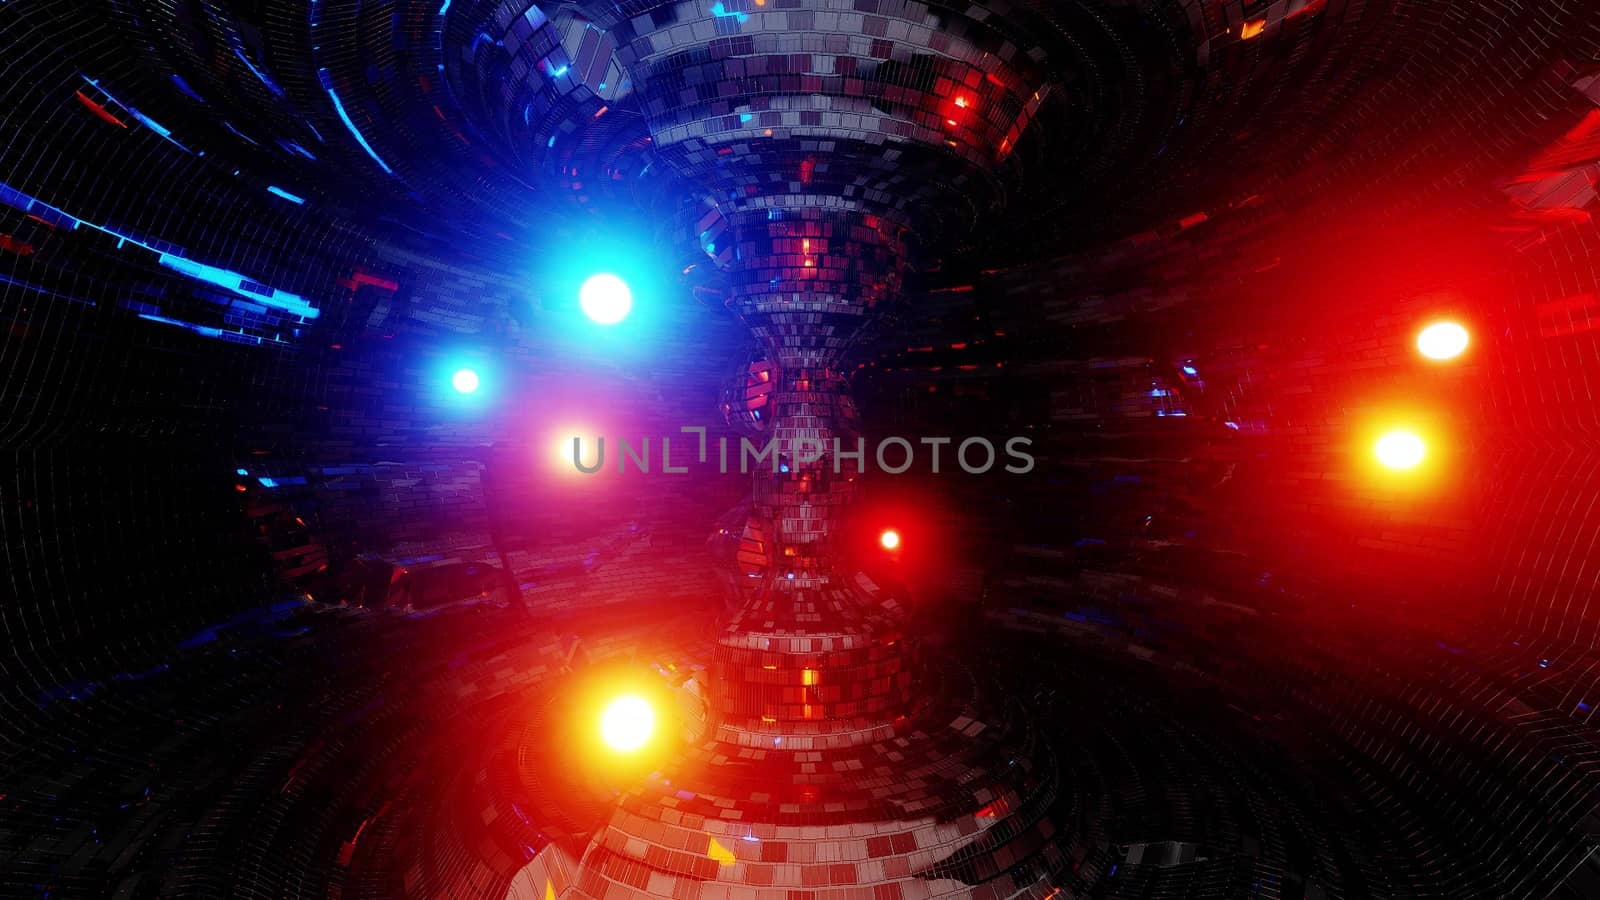 abstract nuclear reactor with glowing atom parrticles and nice reflections 3d illustration background wallpaper, futuristic reactor with brick texture 3d rendering design